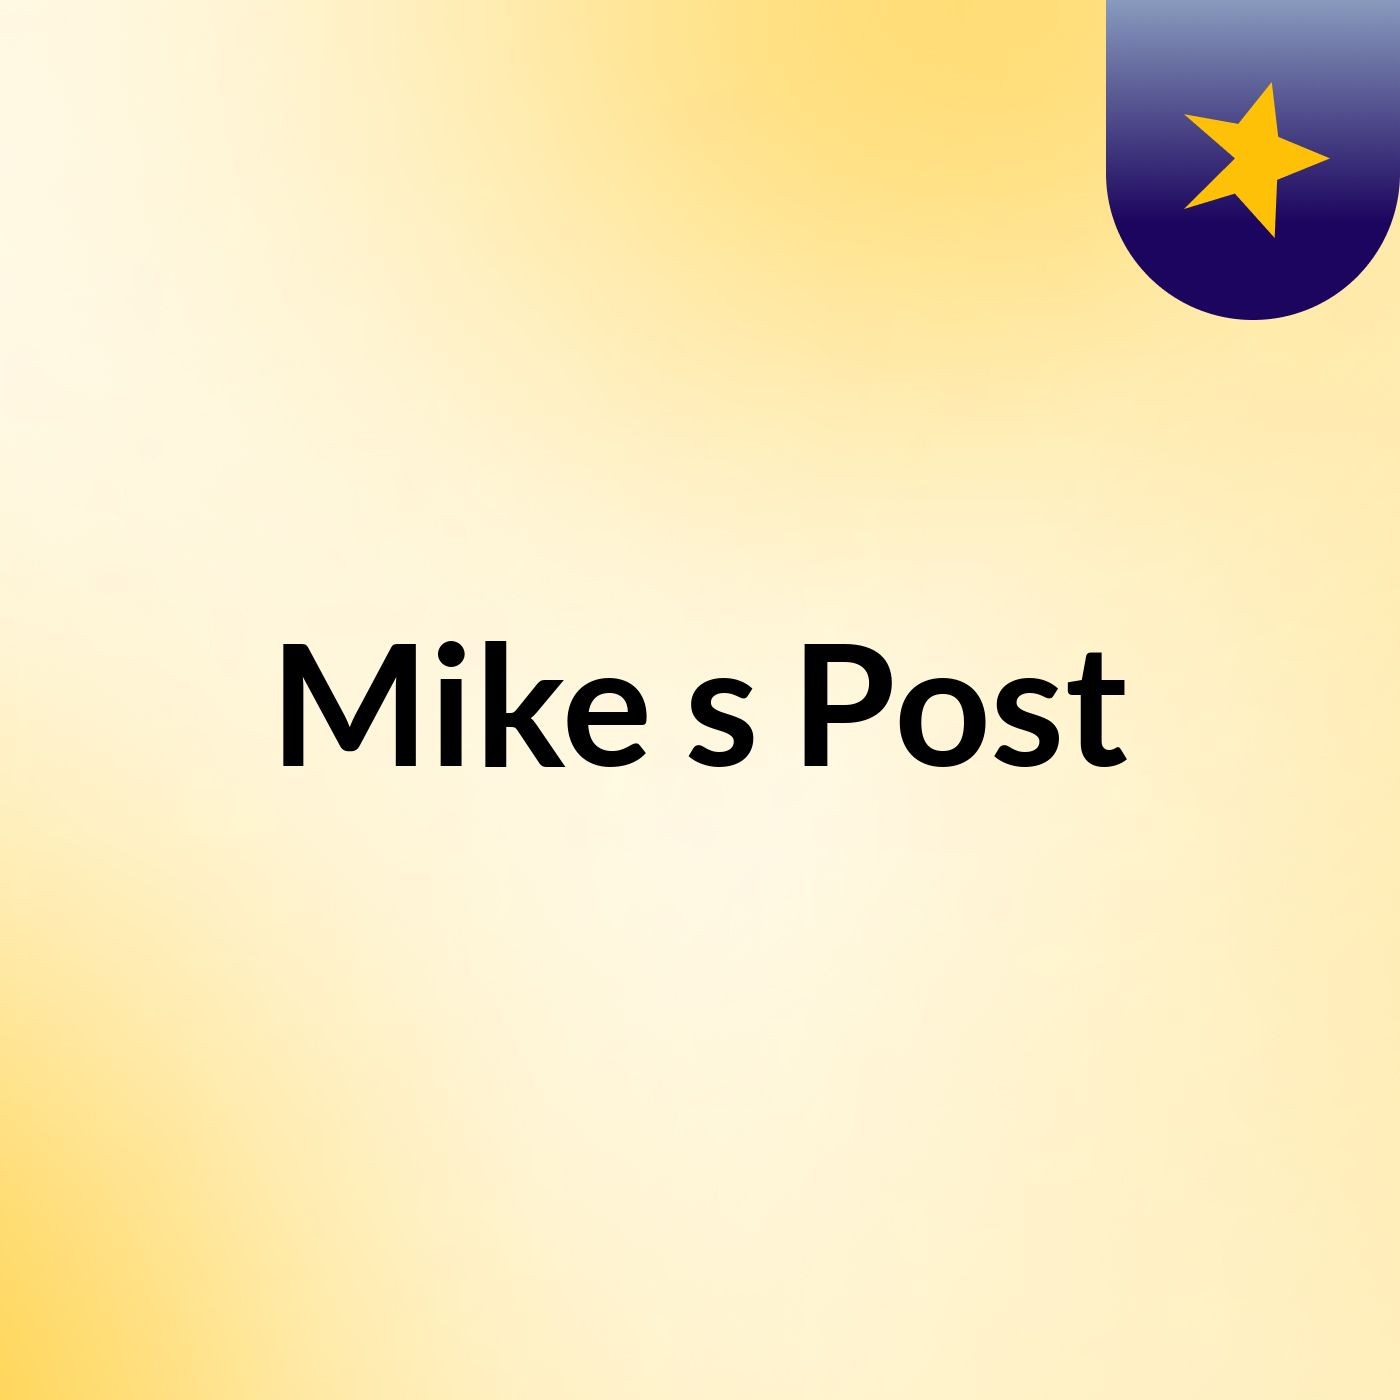 Mike's Post